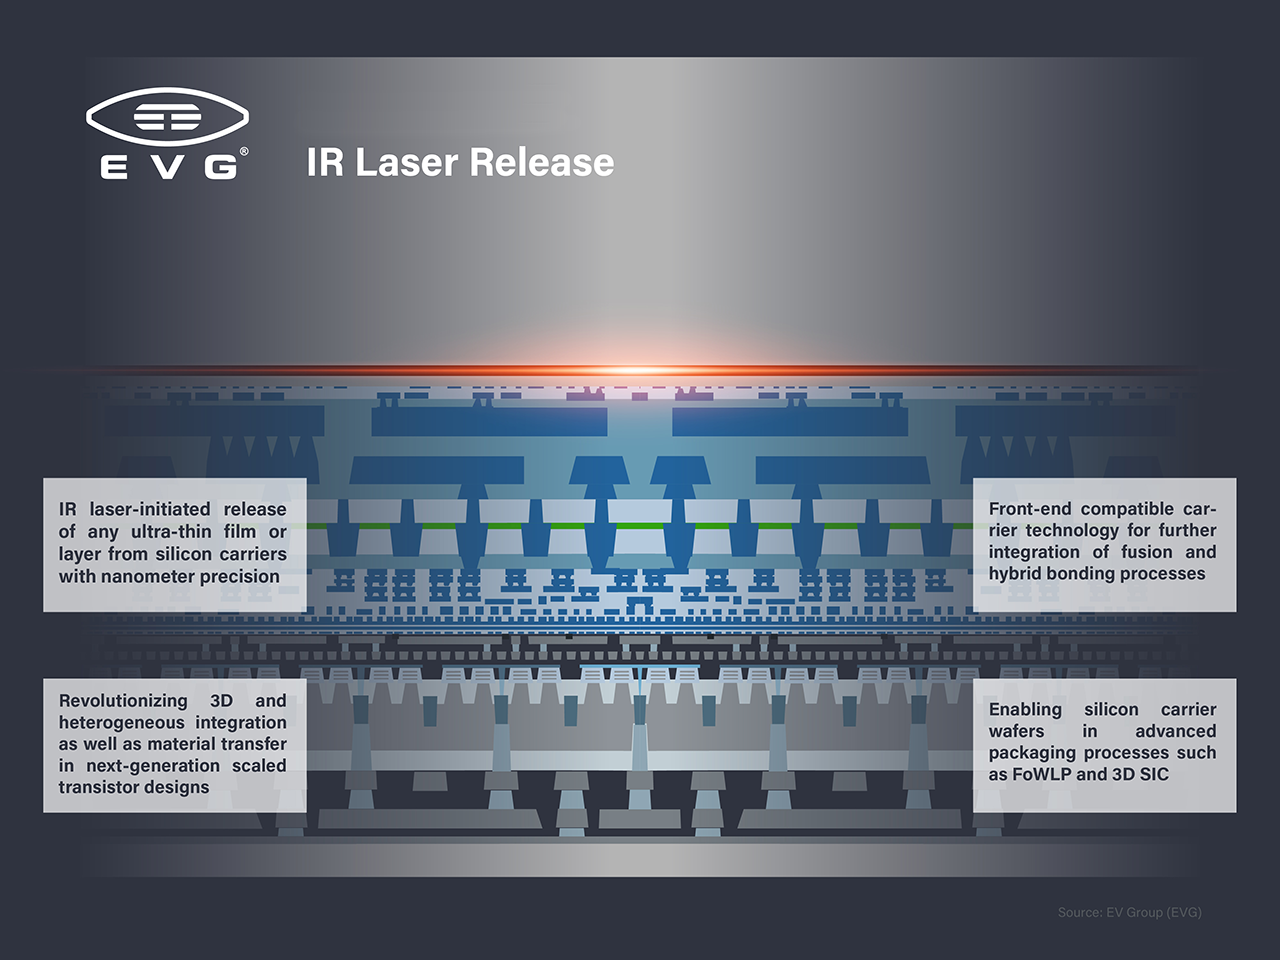 EV Group’s revolutionary LayerRelease technology for silicon enables ultra-thin layer stacking for both semiconductor front-end processing and advanced packaging applications. Source: EV Group